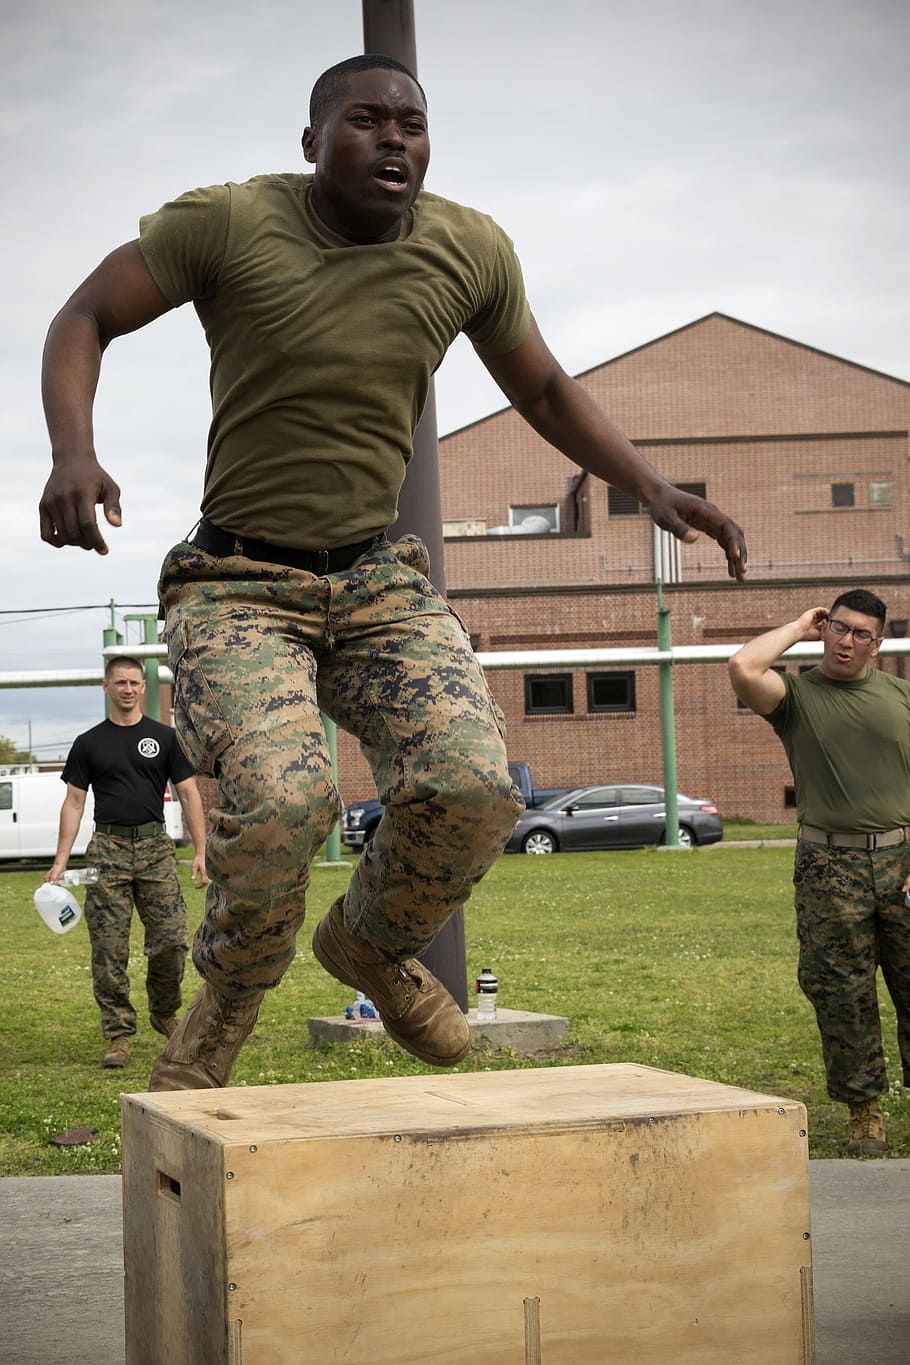 performing, obstacle course, Soldier, CG's Cup, Combat Camera, drill, Drill Instructor, Fitness Challenge, photos, MCRD Parris Island